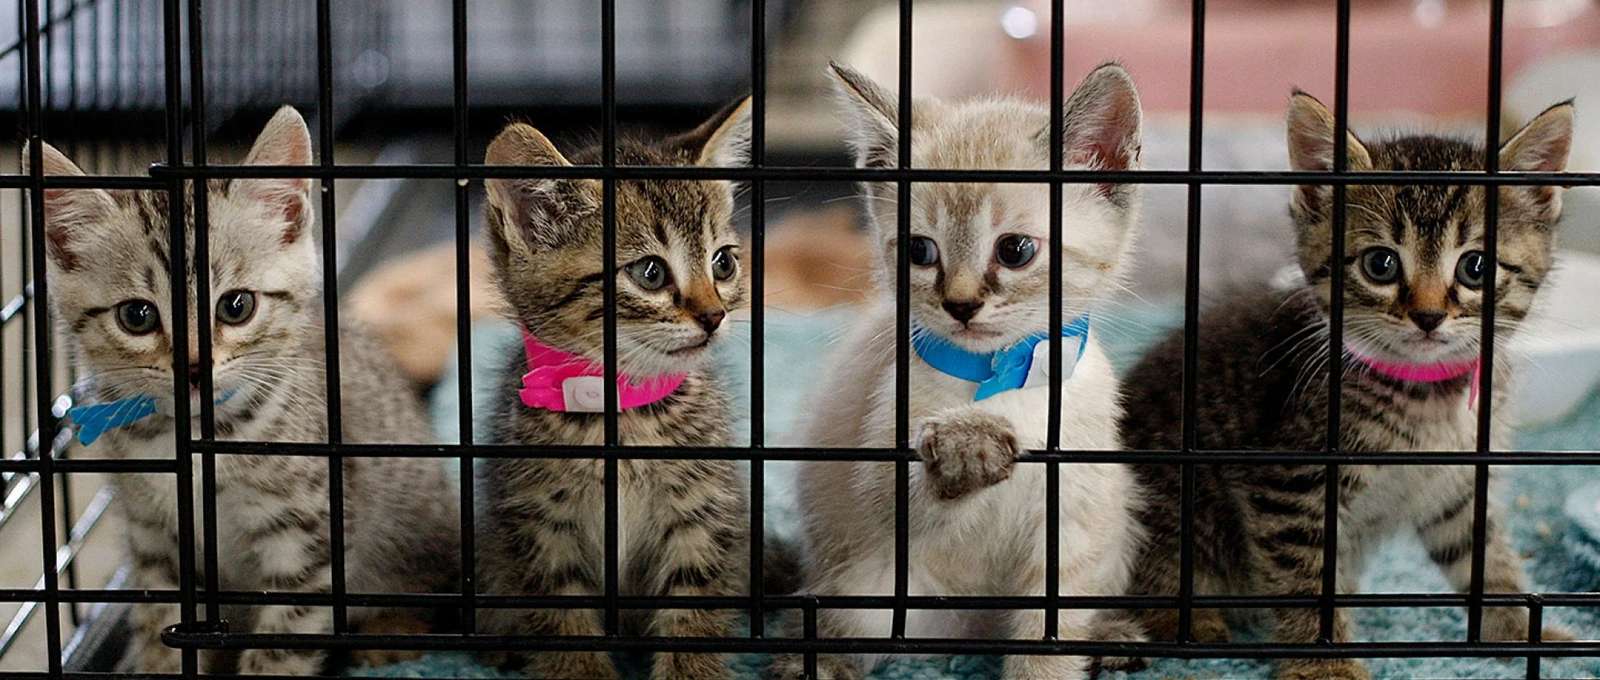 Kitten in Shelter puzzle online from photo